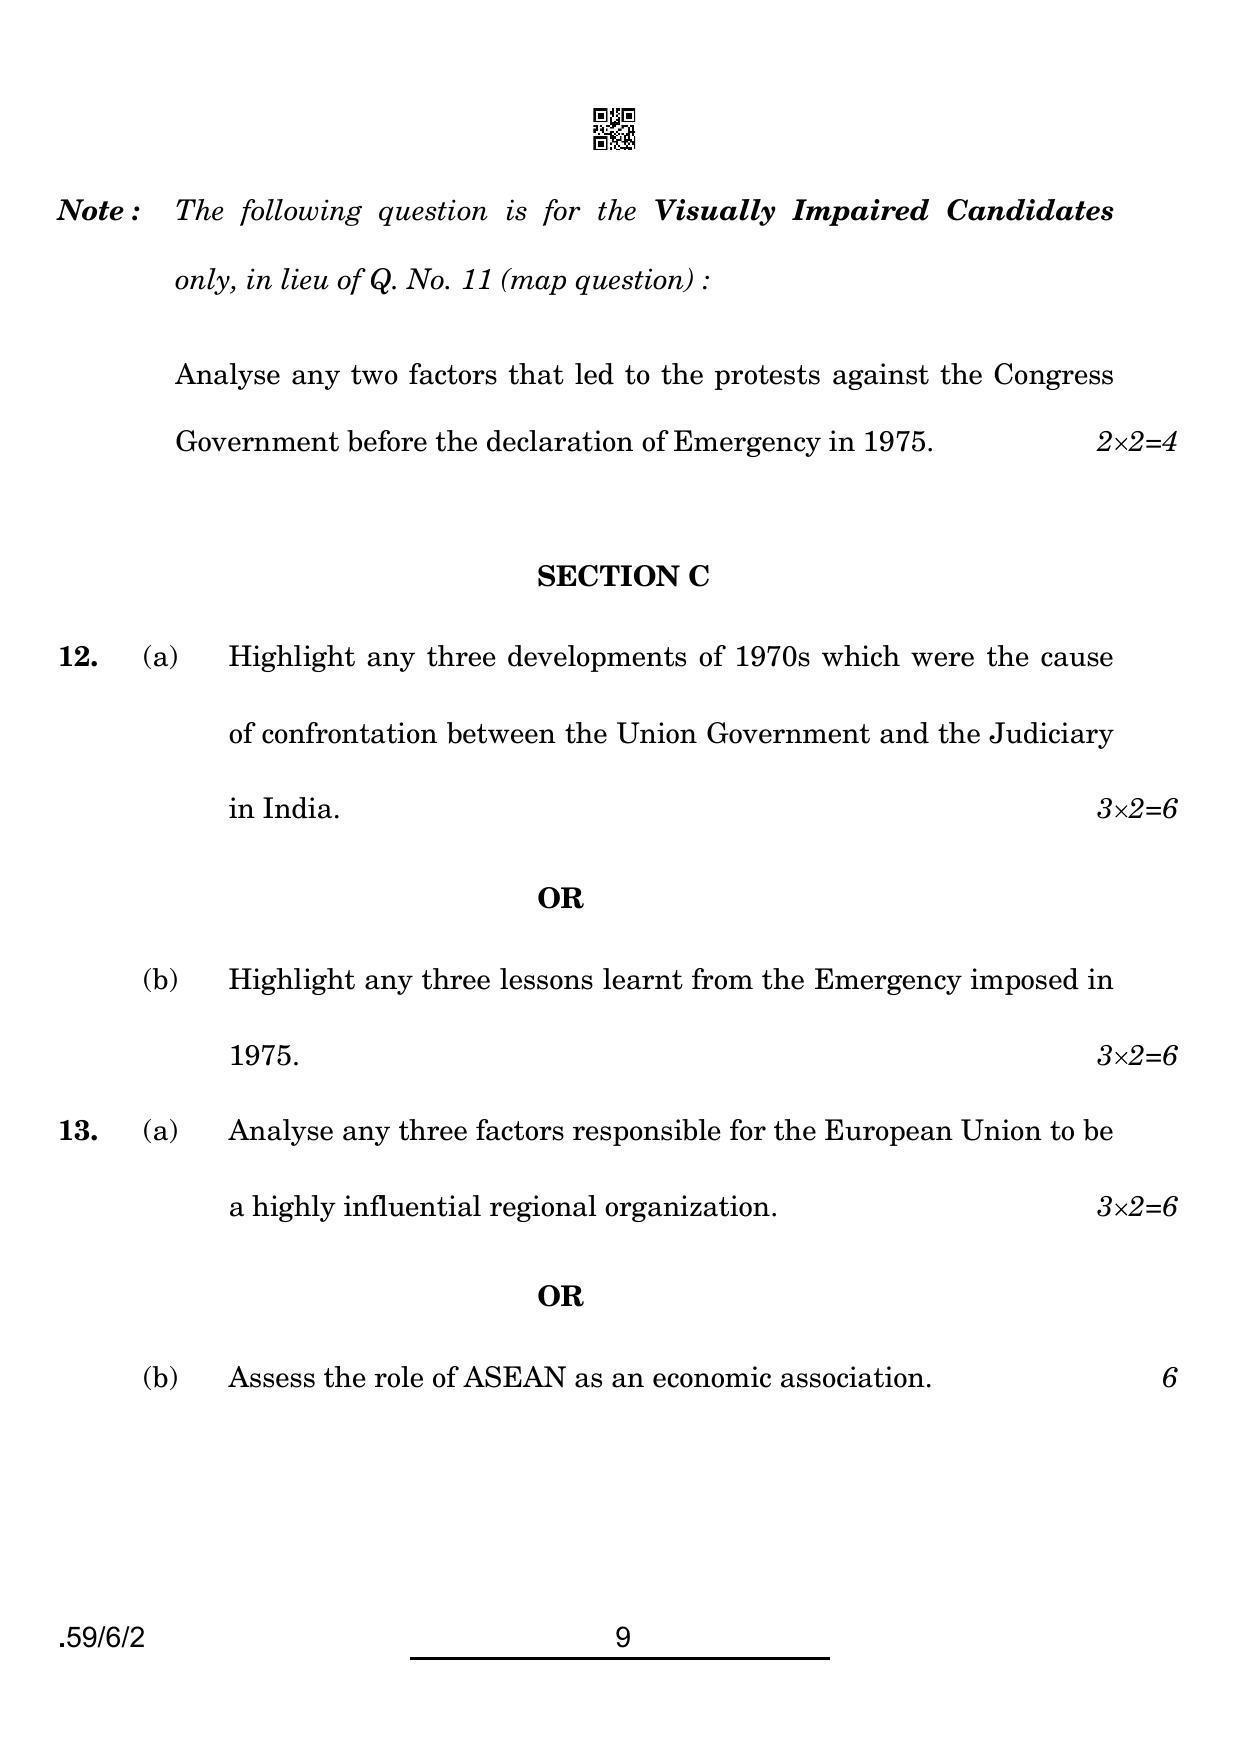 CBSE Class 12 59-6-2 POL SCIENCE 2022 Compartment Question Paper - Page 9